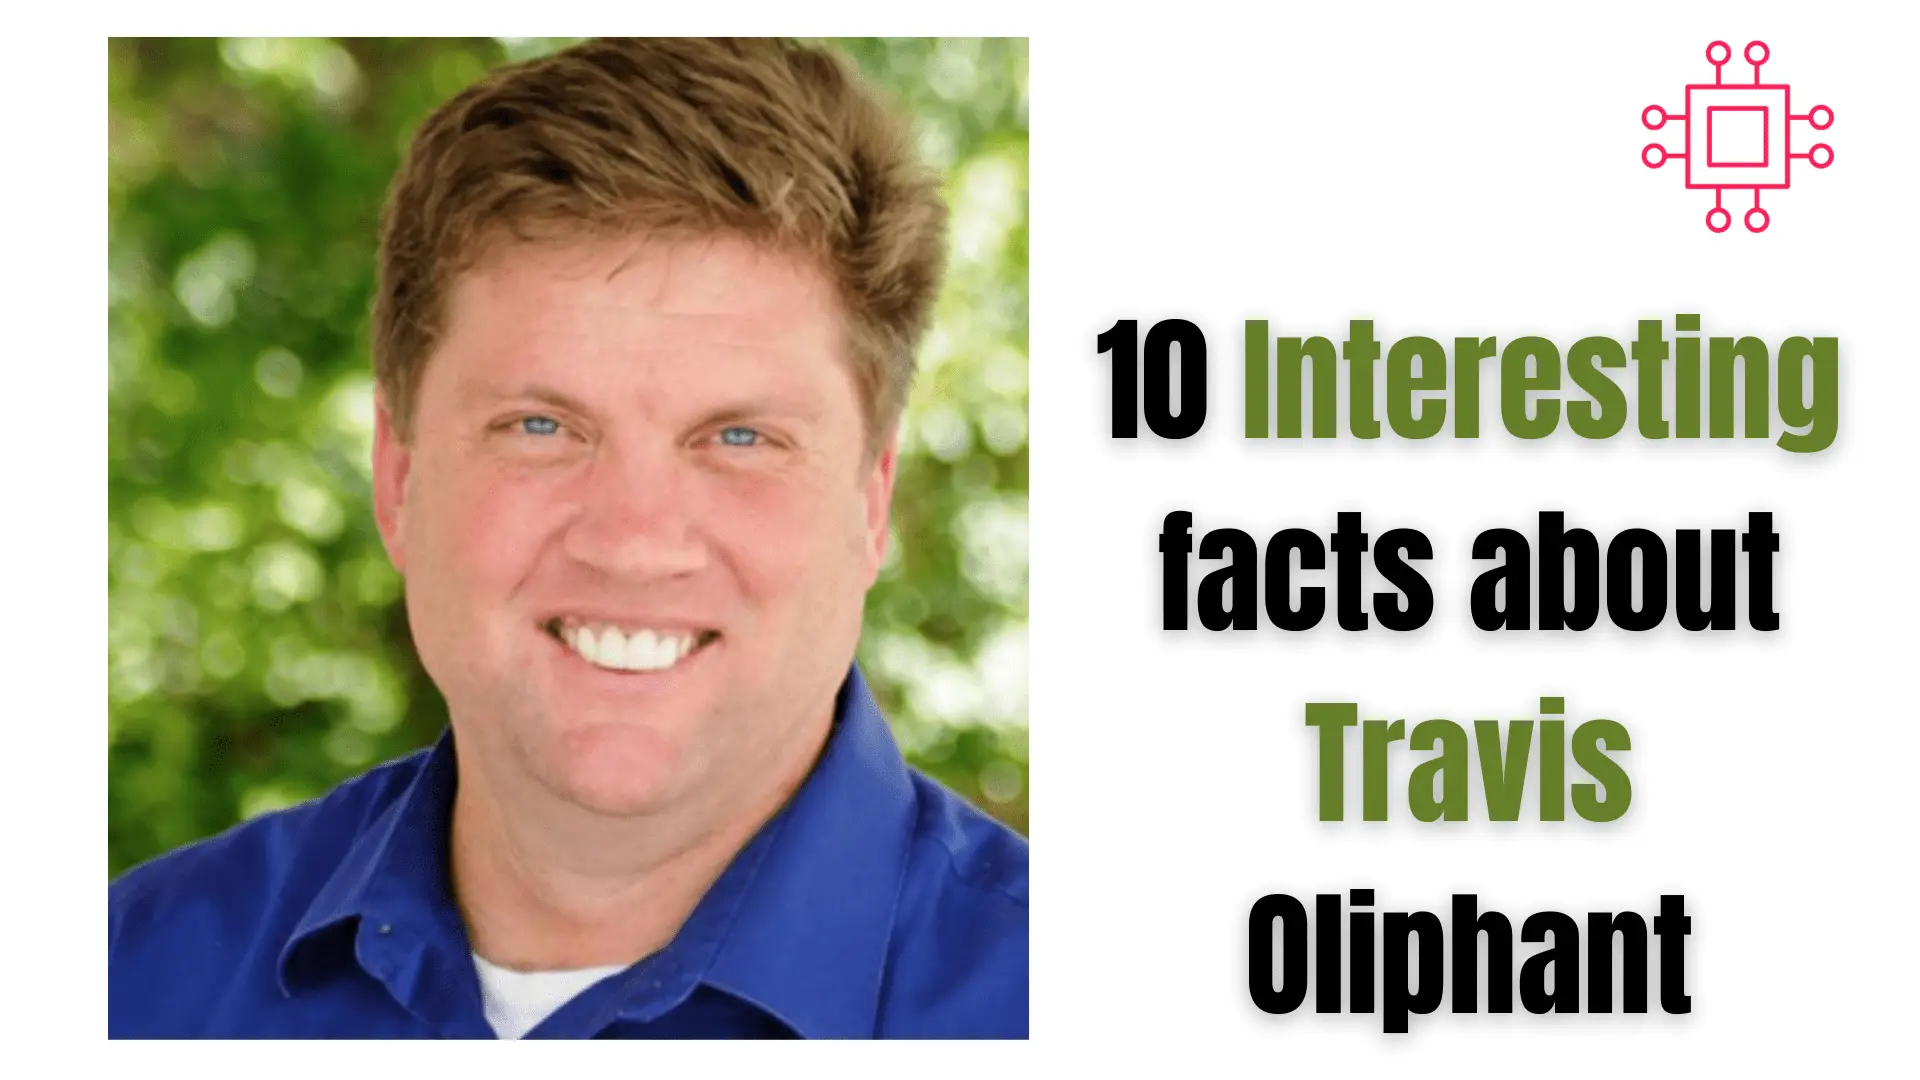 About Travis Oliphant